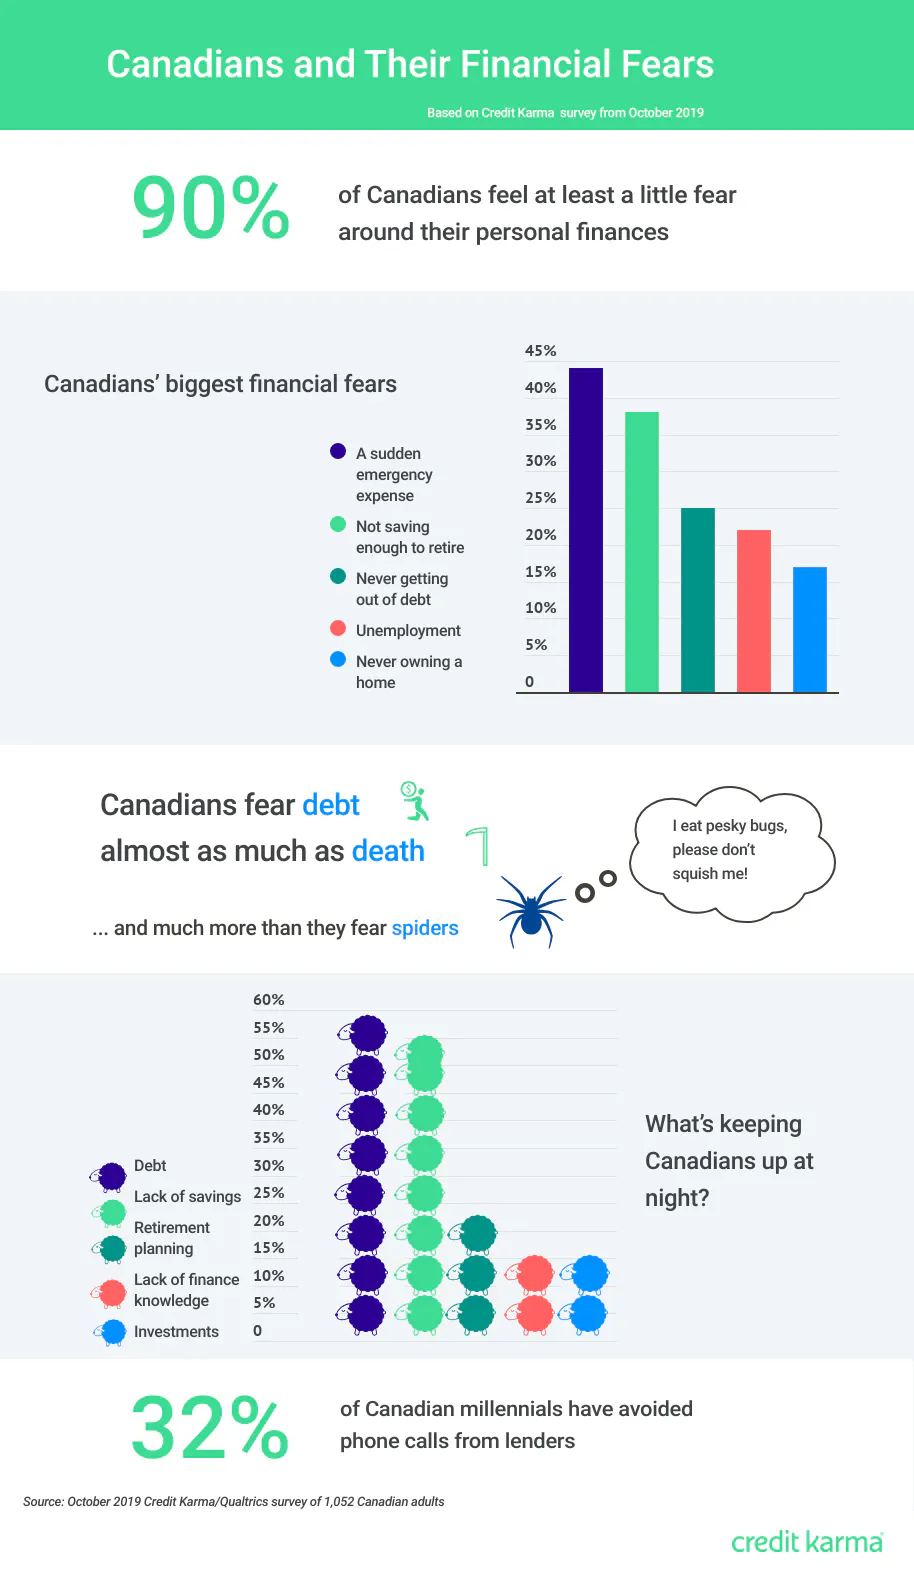 An infographic that summarizes the Canadian financial fears stats summarized in this article